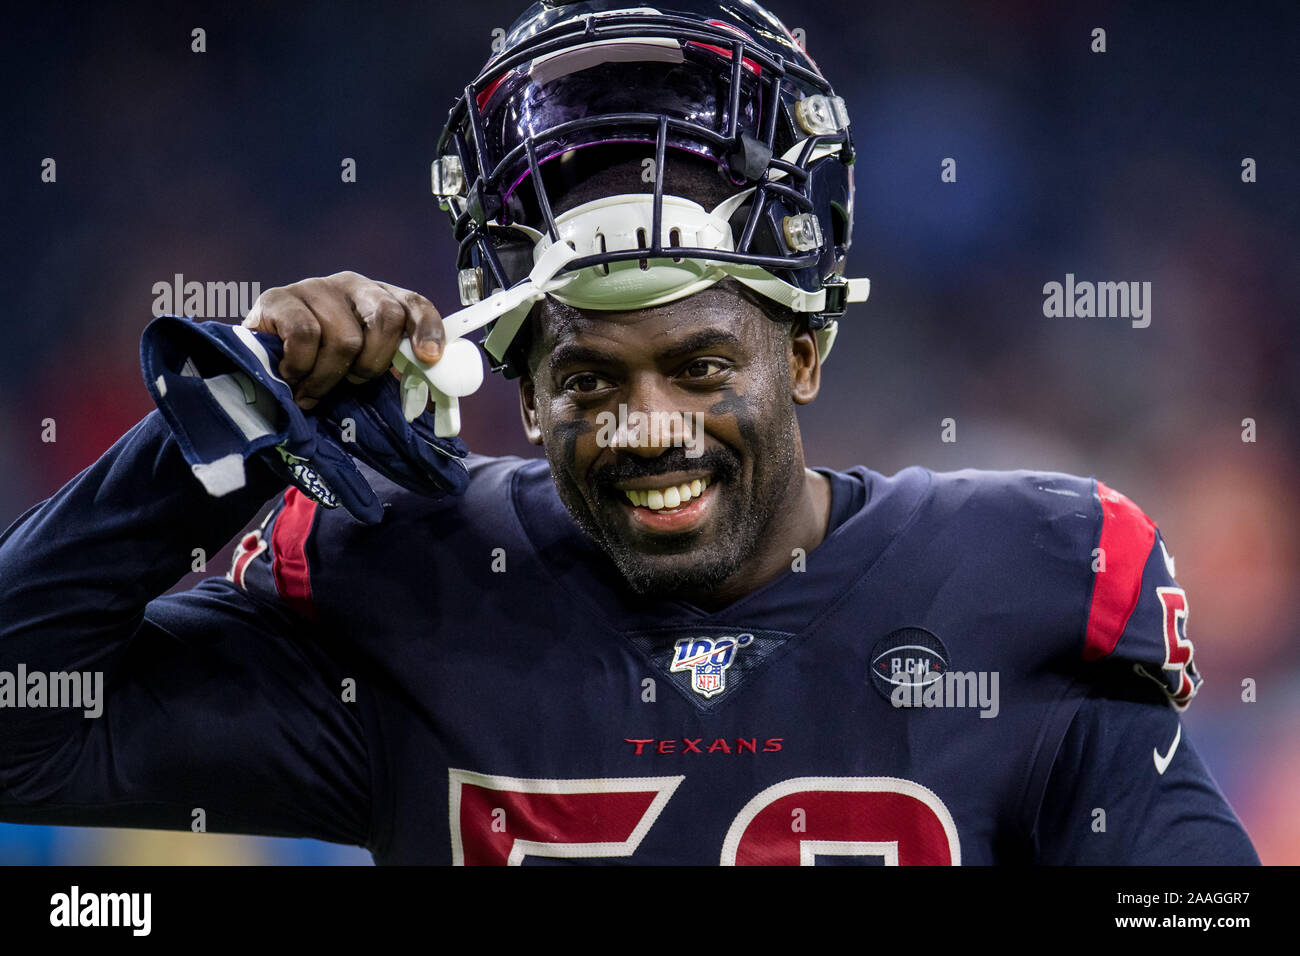 Houston, TX, USA. 21st Nov, 2019. Houston Texans outside linebacker Whitney Mercilus (59) walks off the field after an NFL football game between the Indianapolis Colts and the Houston Texans at NRG Stadium in Houston, TX. The Texans won the game 20 to 17.Trask Smith/CSM/Alamy Live News Stock Photo